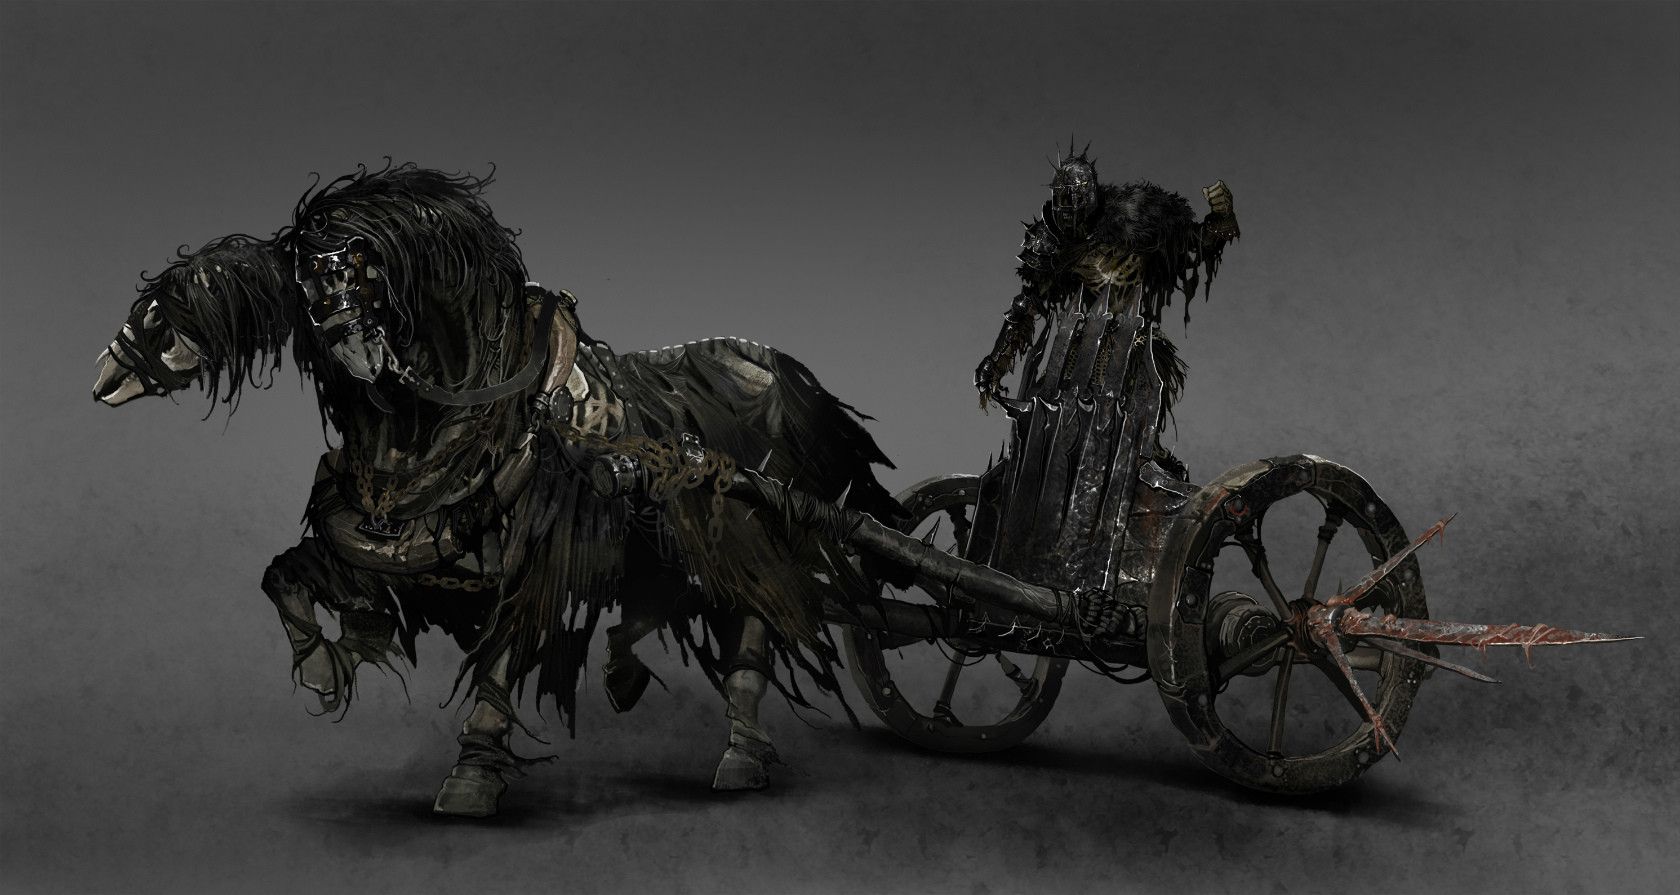 Executioner's Chariot Concept Art from Dark Souls 2 Scholar of the First Sin Huntsman's Copse boss